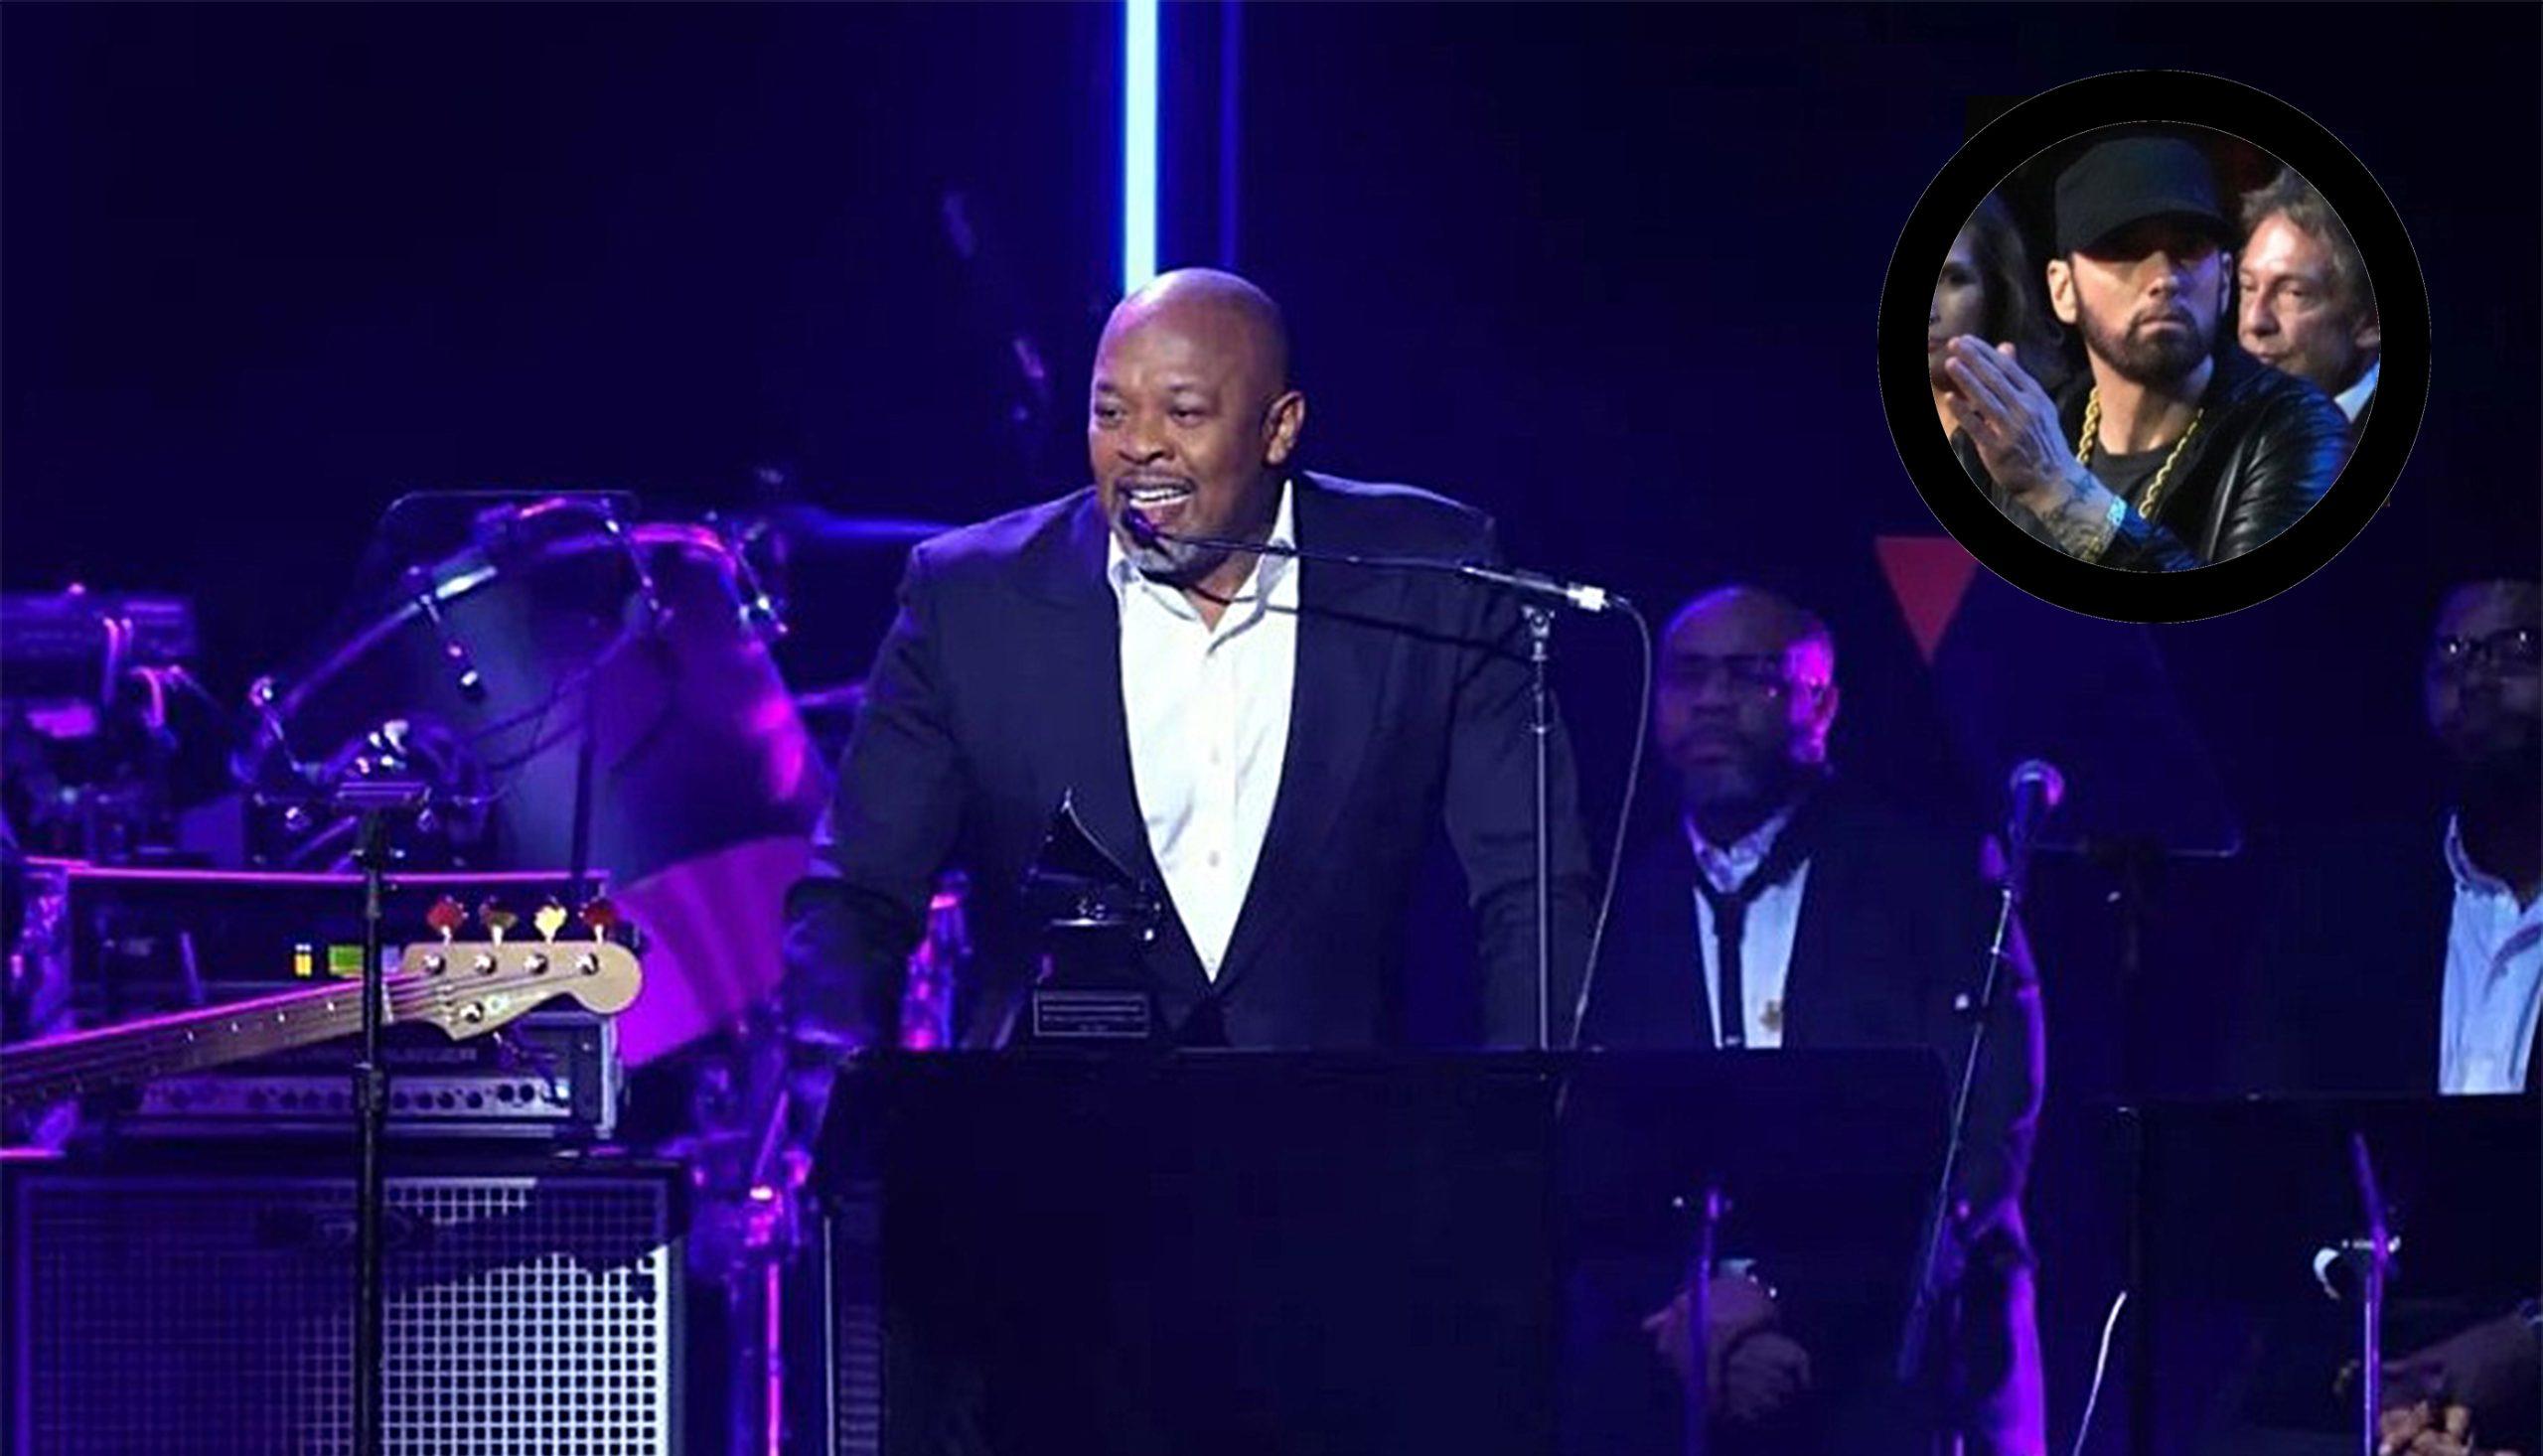 Dr. Dre shouts out Eminem at the 2023 Grammy Awards event Southpawer